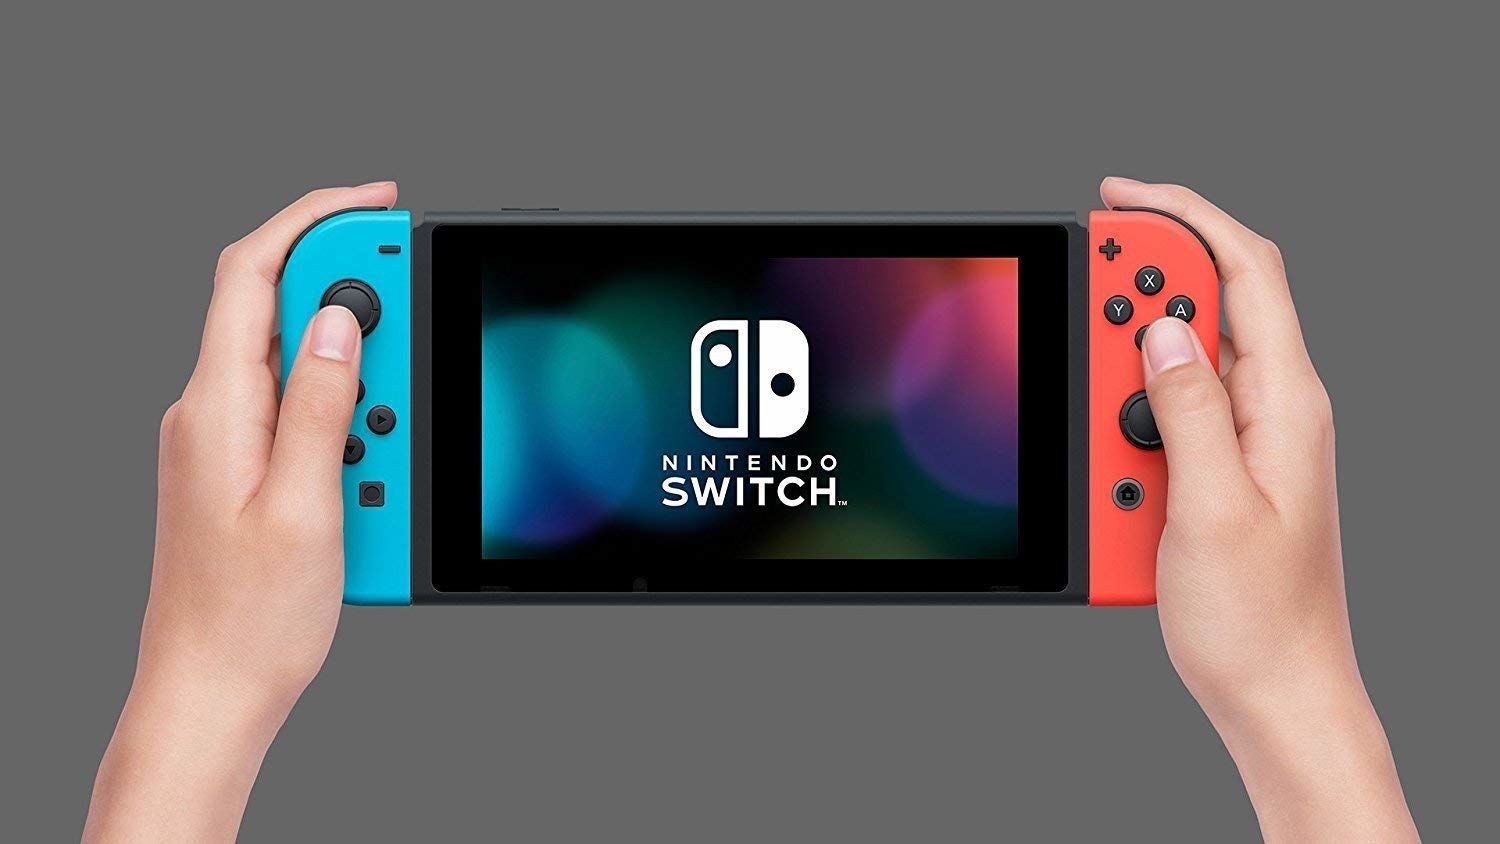 Nintendo will finally be able to launch its Switch in China with Tencent